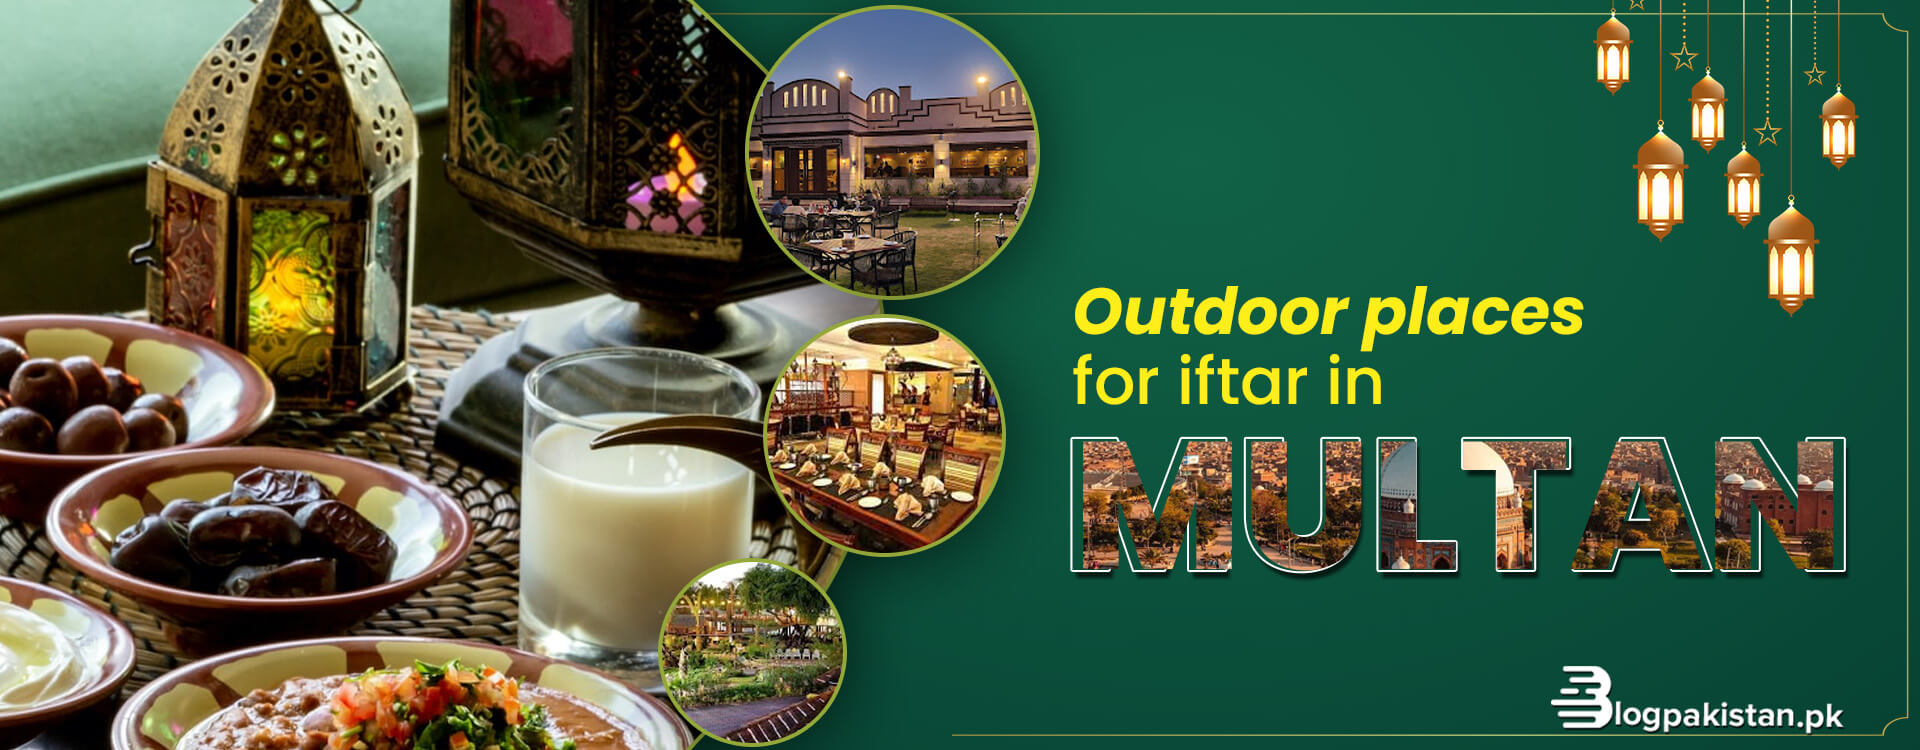 Outdoor places for iftar in Multan